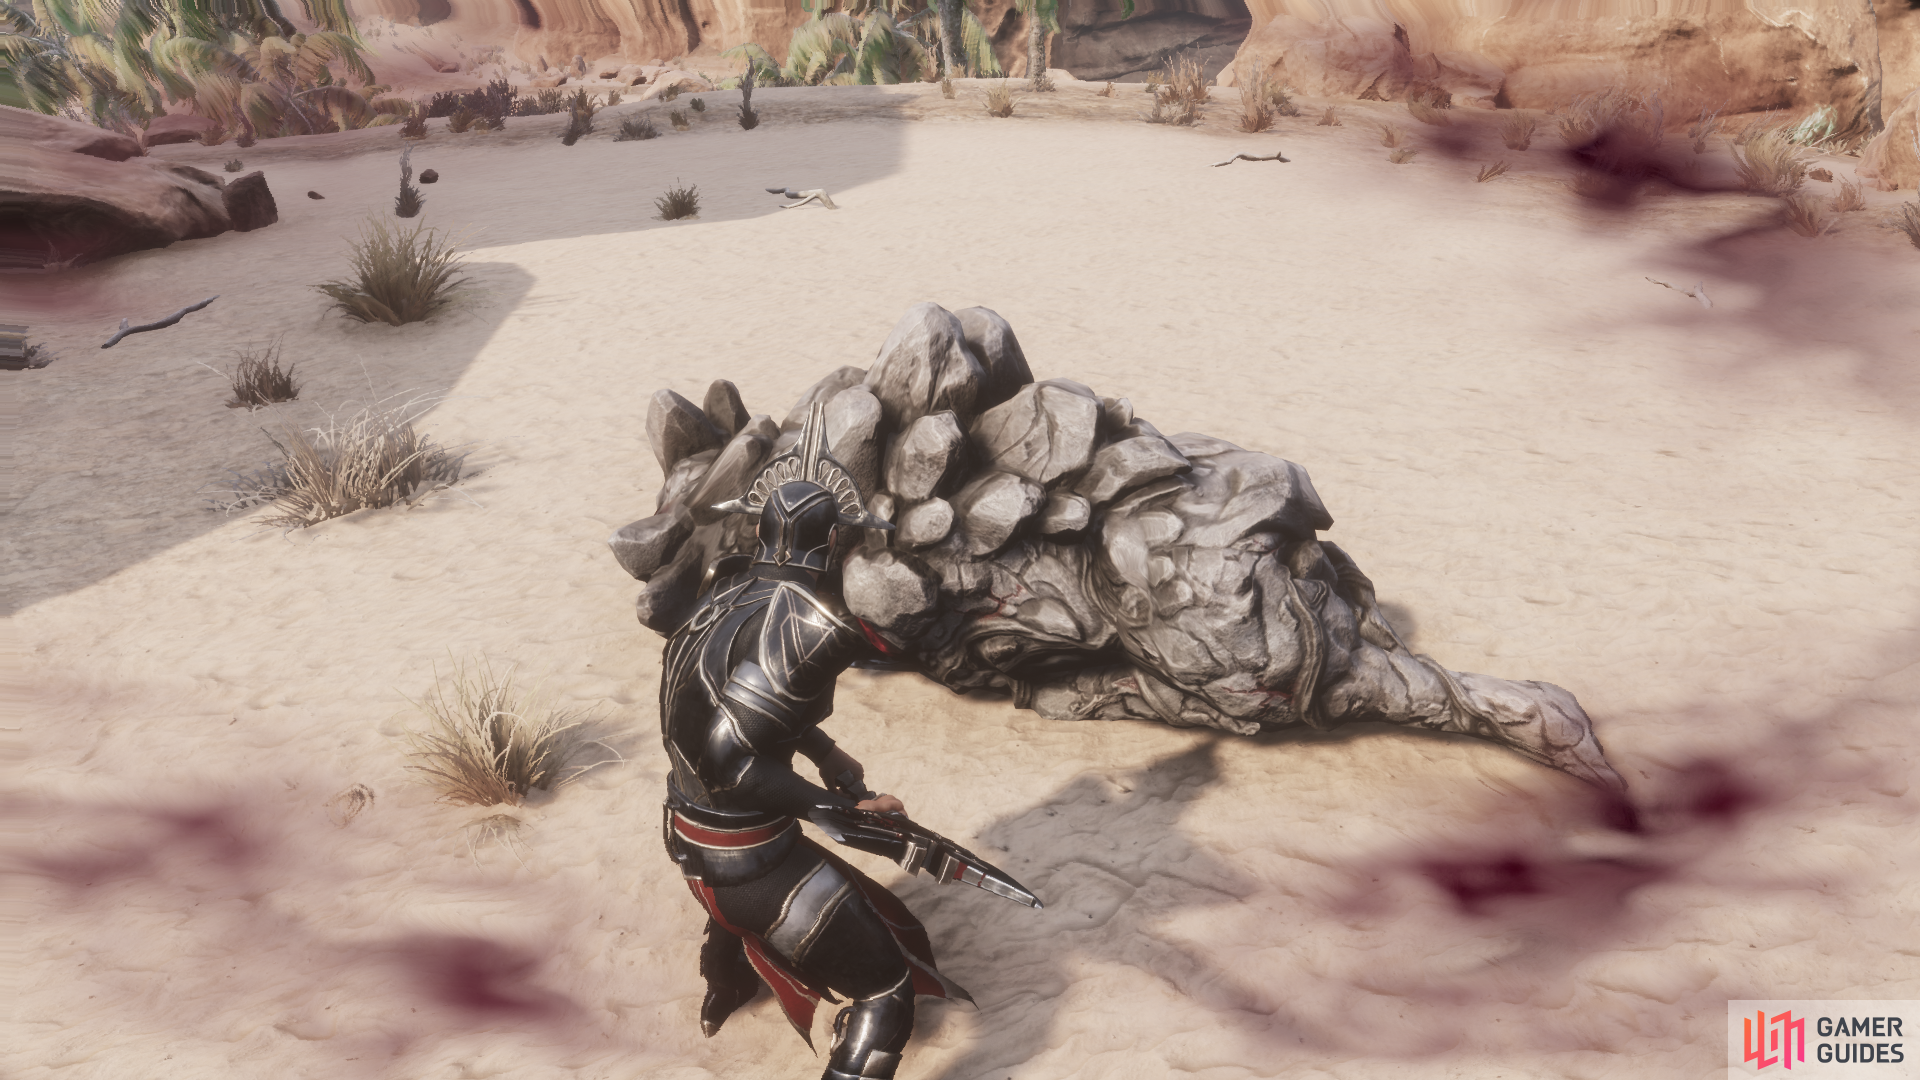 A Blood Crystal Rocknose in Conan Exiles